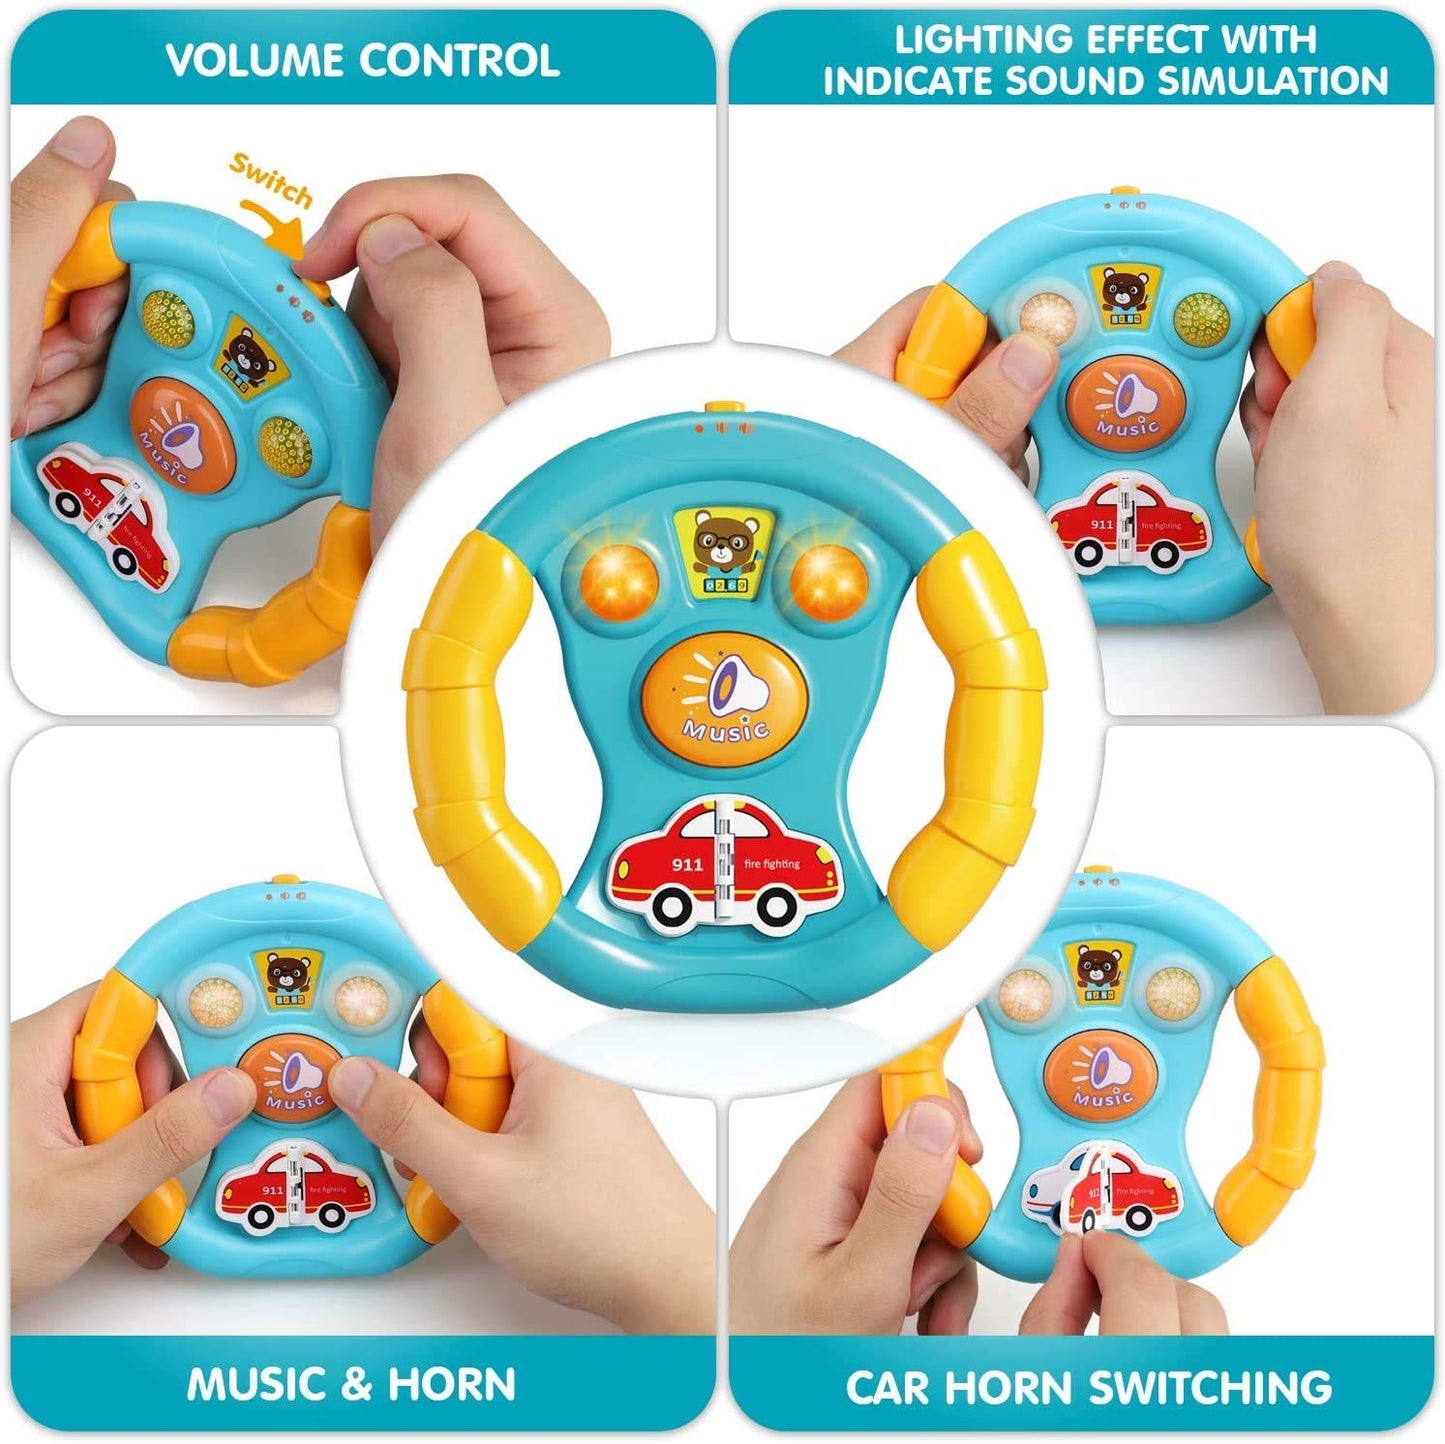 AZi® Mini Steering Wheel Rattle Toy for Baby Made in Safe Non-Toxic, Attractive Rattle, Children and Toddlers Toy and Infant Products Activity Best for Baby First Toys (Pack of 1)